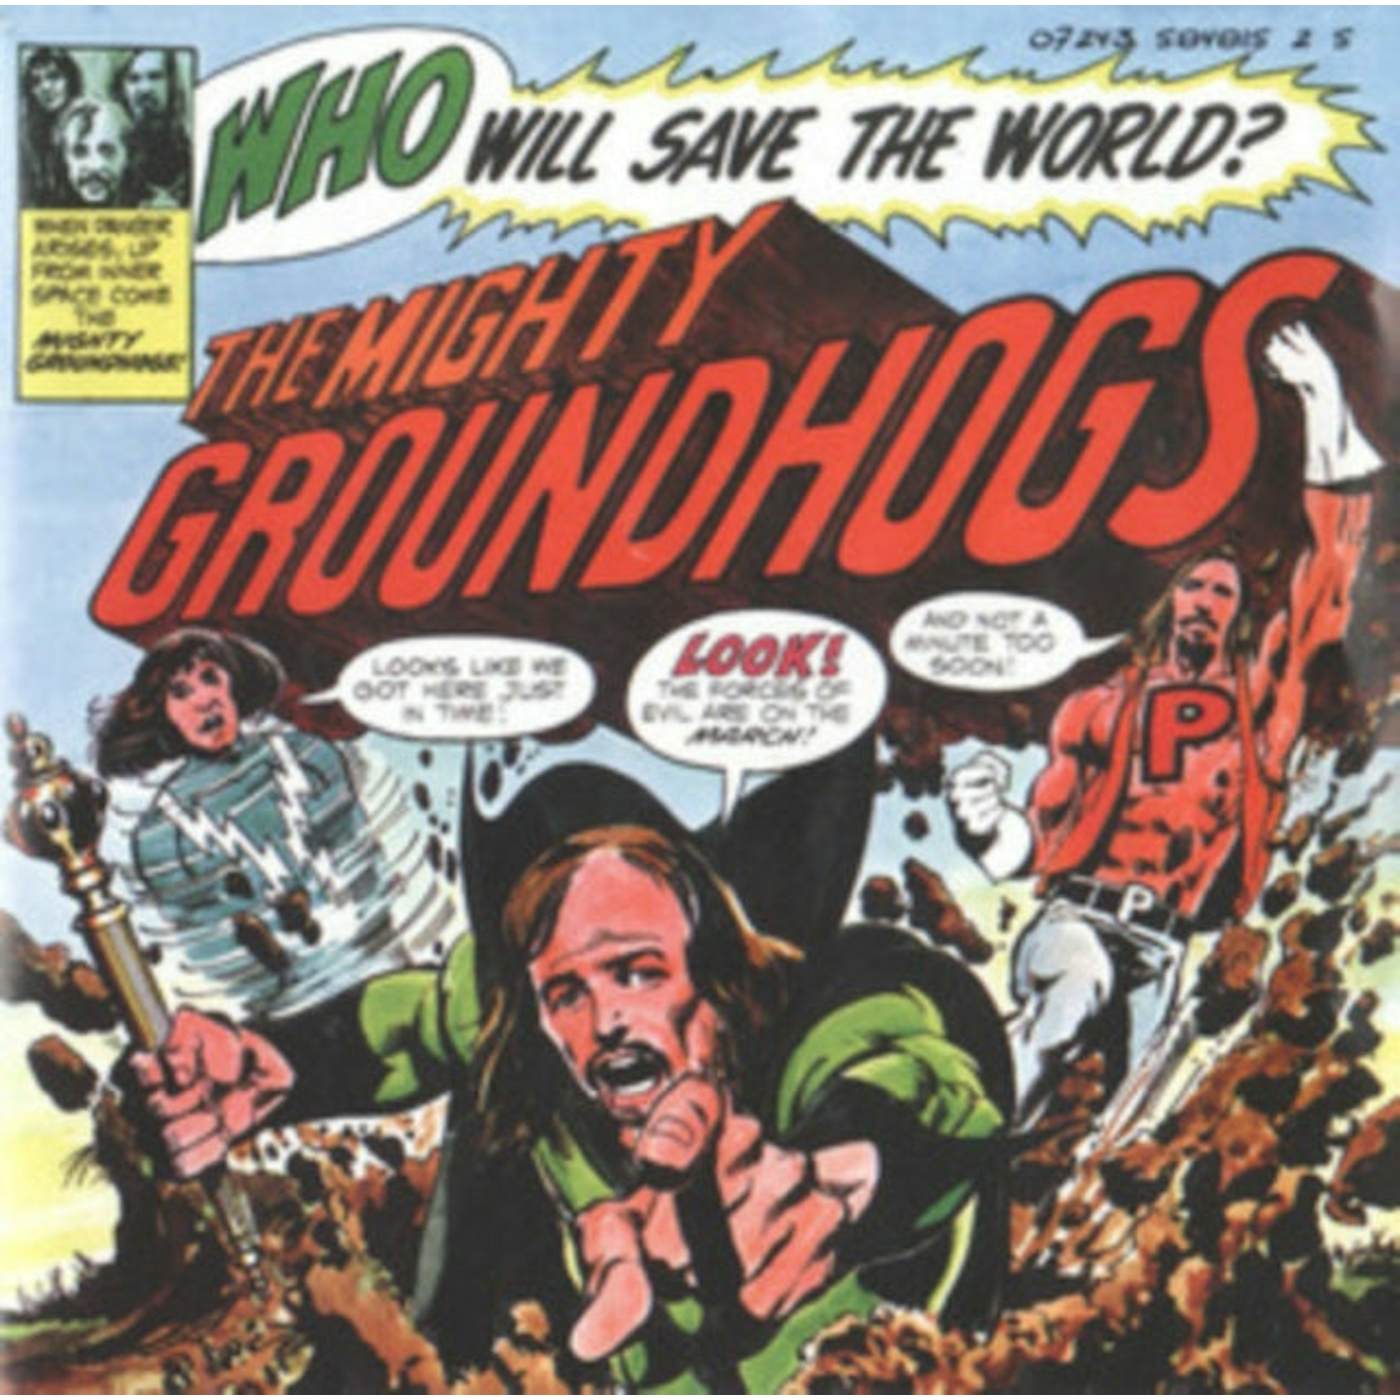 The Groundhogs LP Vinyl Record - Who Will Save The World